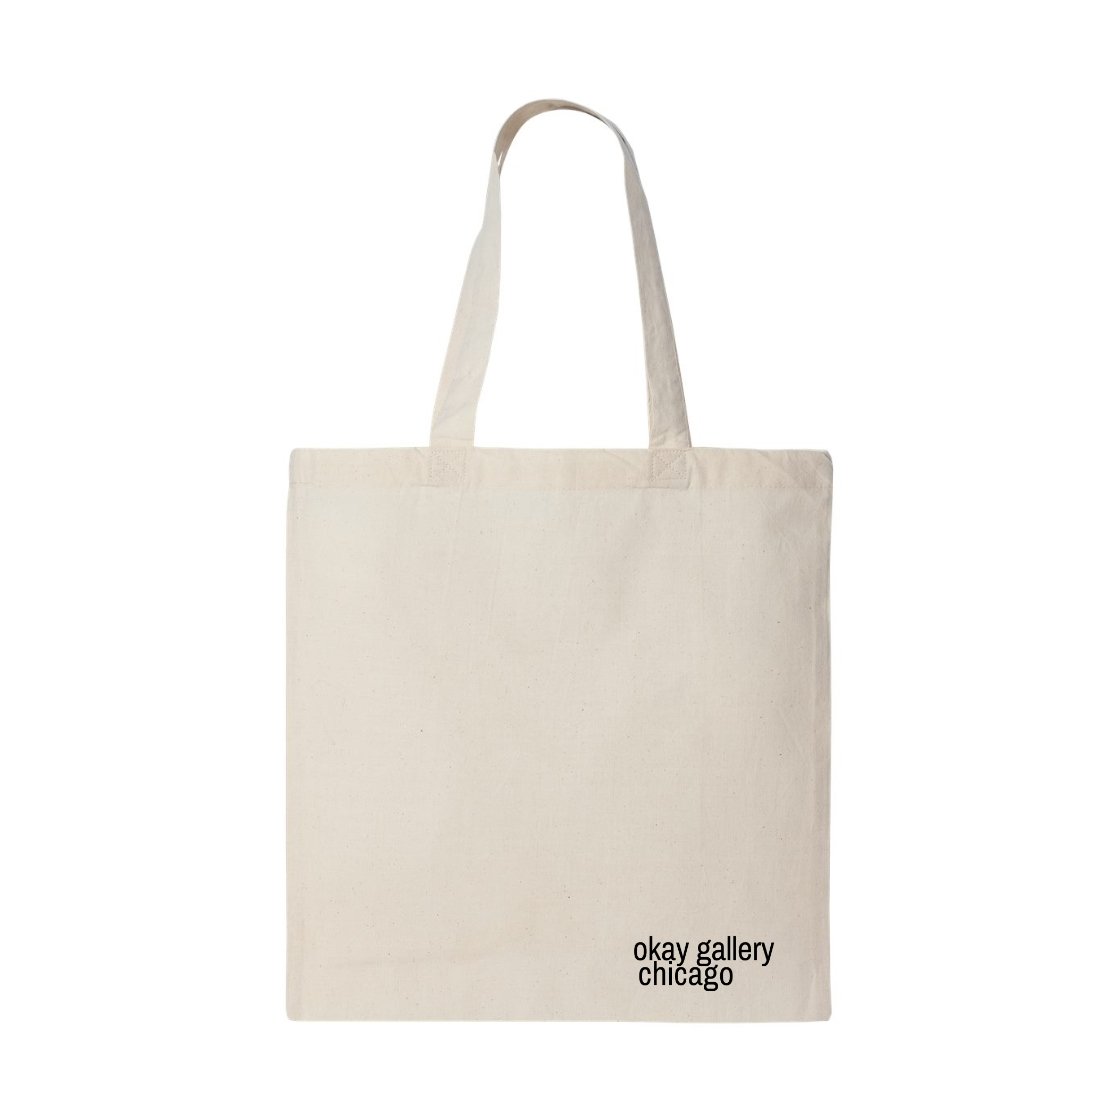 Image of okay gallery chicago Classic Tote Bag Natural